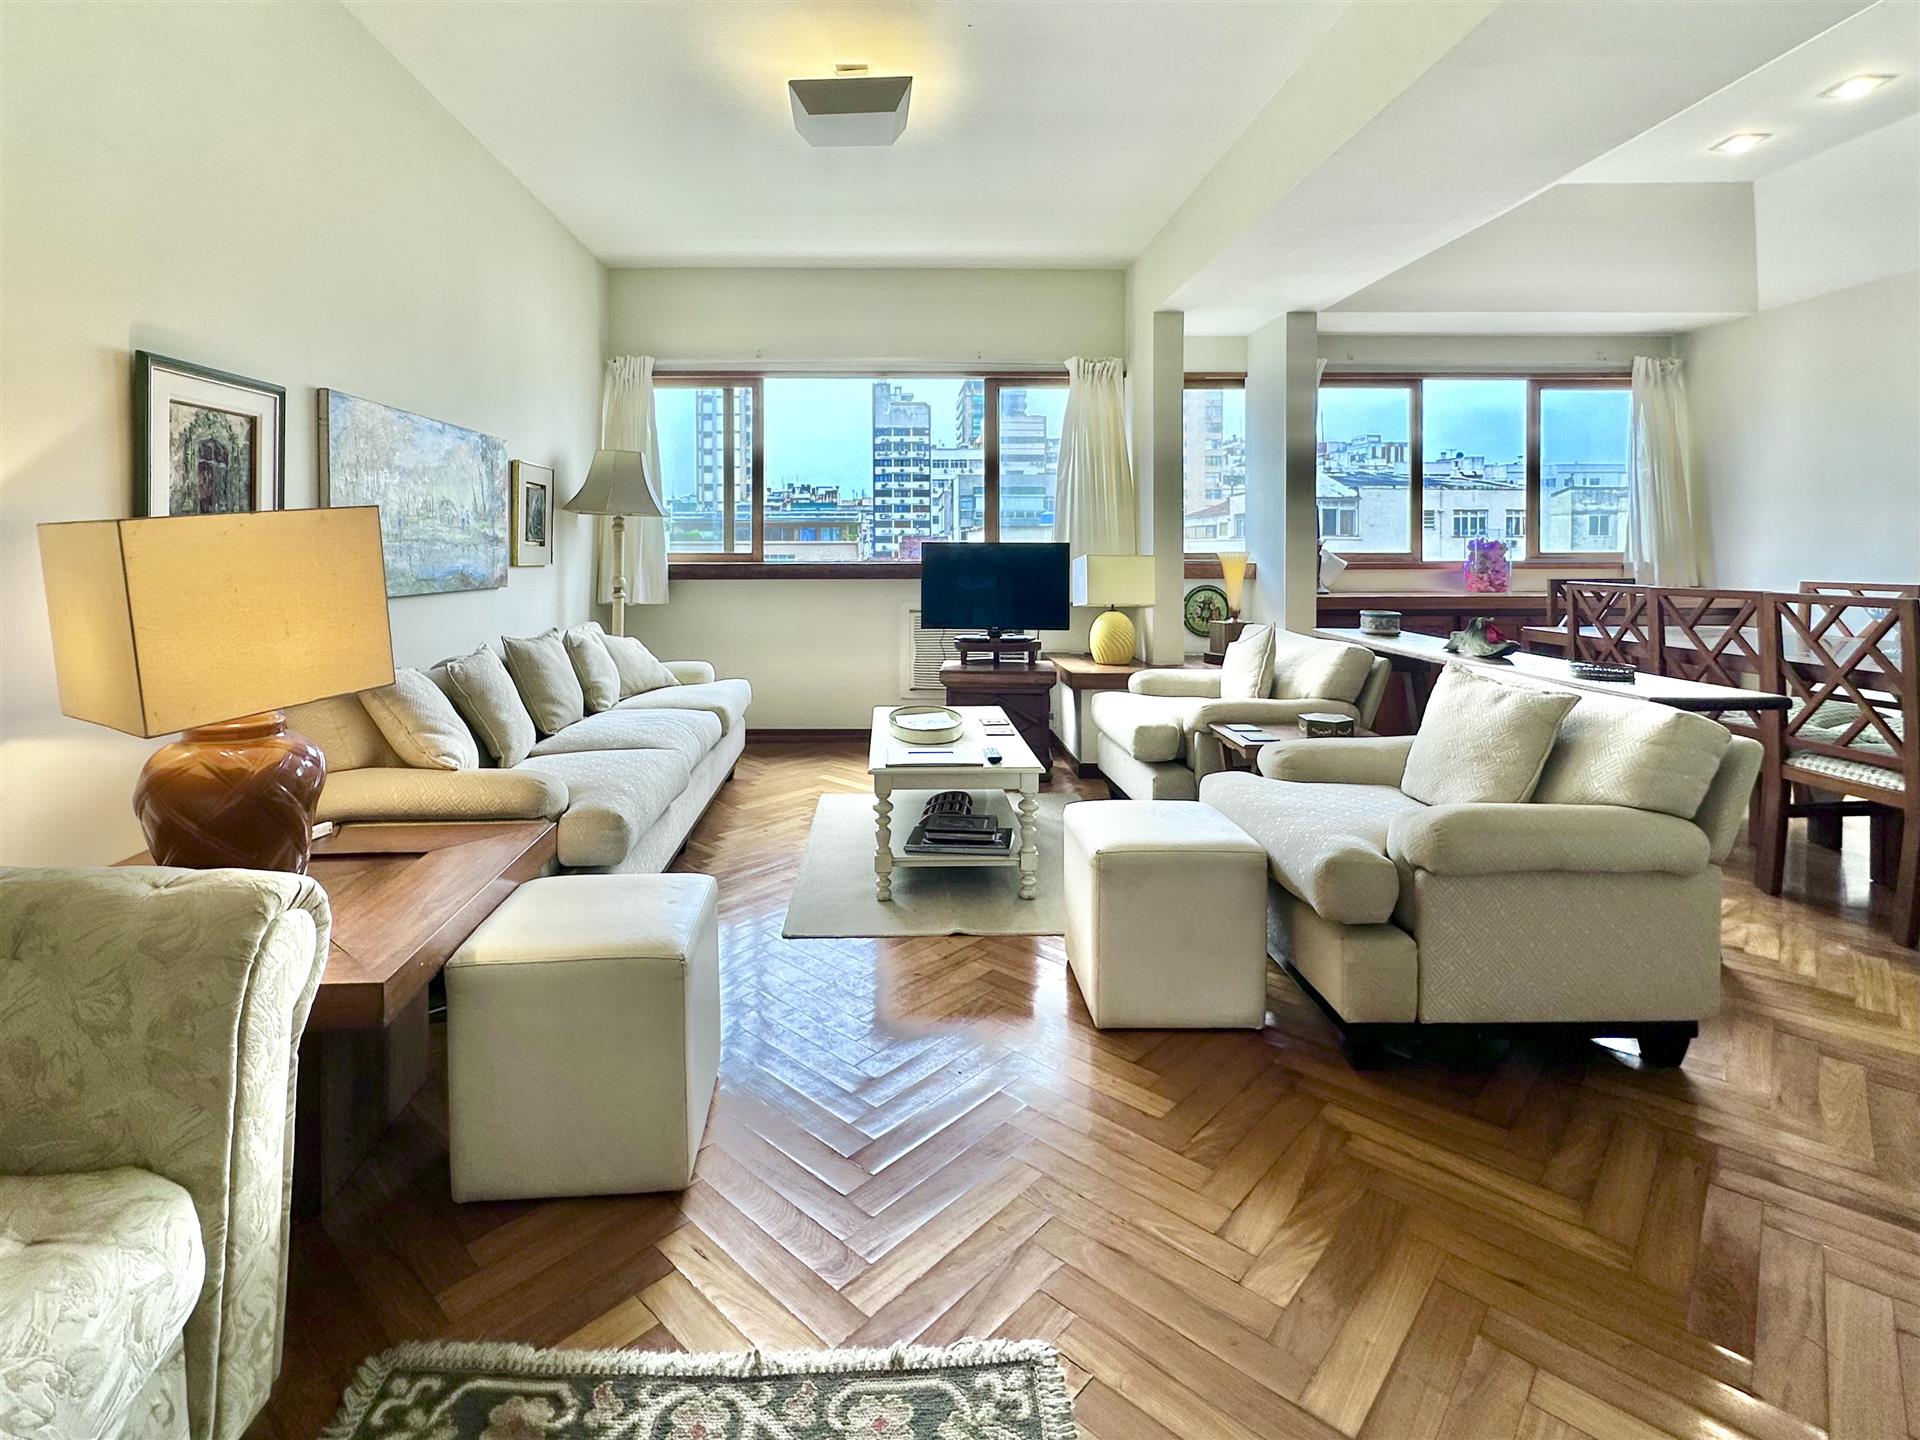 Spacious 4-Bedroom Apartment for Sale in Ipanema